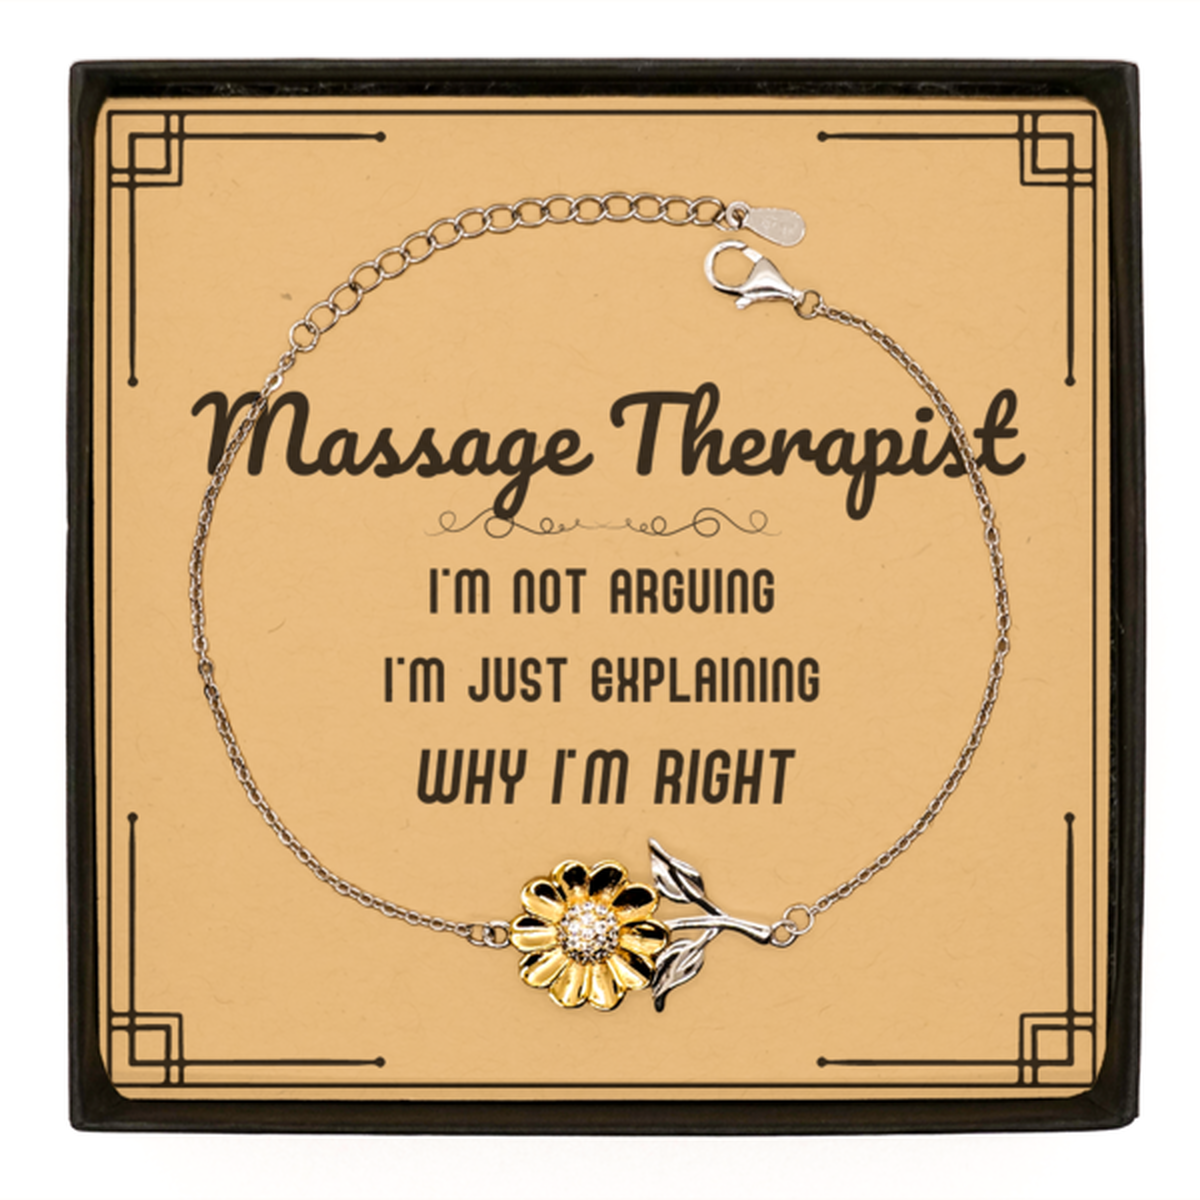 Massage Therapist I'm not Arguing. I'm Just Explaining Why I'm RIGHT Sunflower Bracelet, Funny Saying Quote Massage Therapist Gifts For Massage Therapist Message Card Graduation Birthday Christmas Gifts for Men Women Coworker